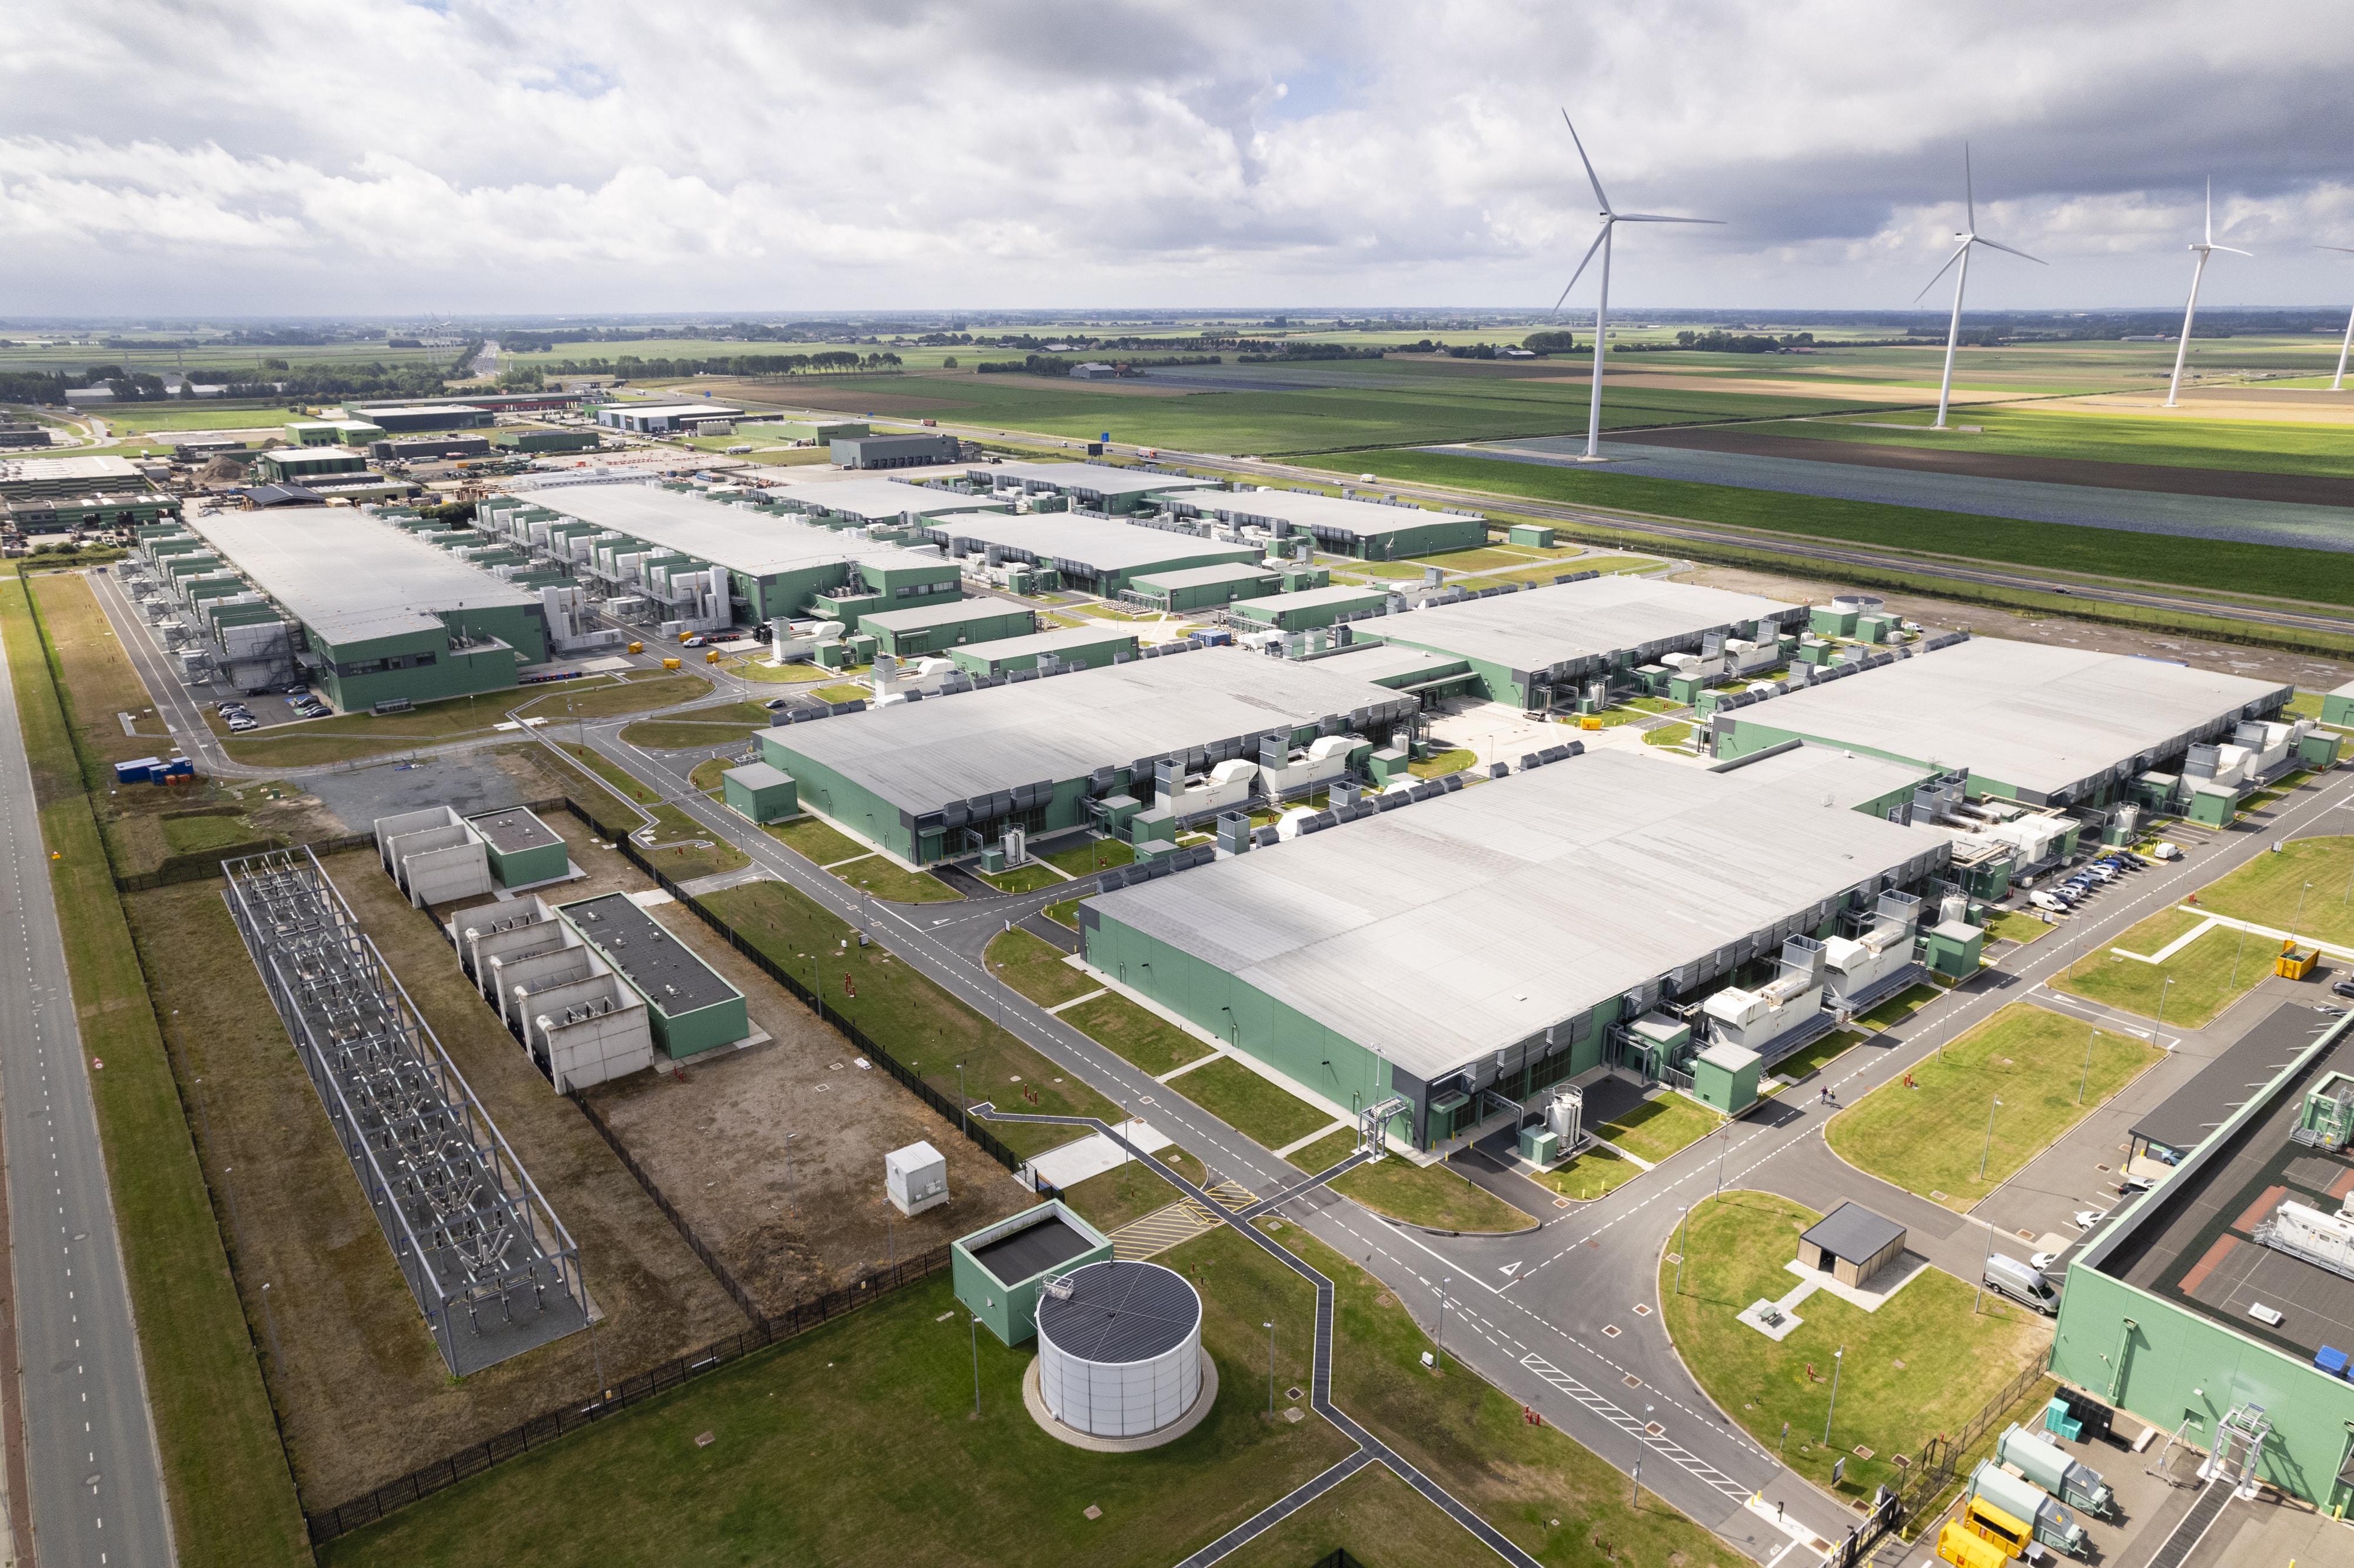 Aerial view of industrial decarbonization: factories and infrastructure working towards reducing carbon emissions.